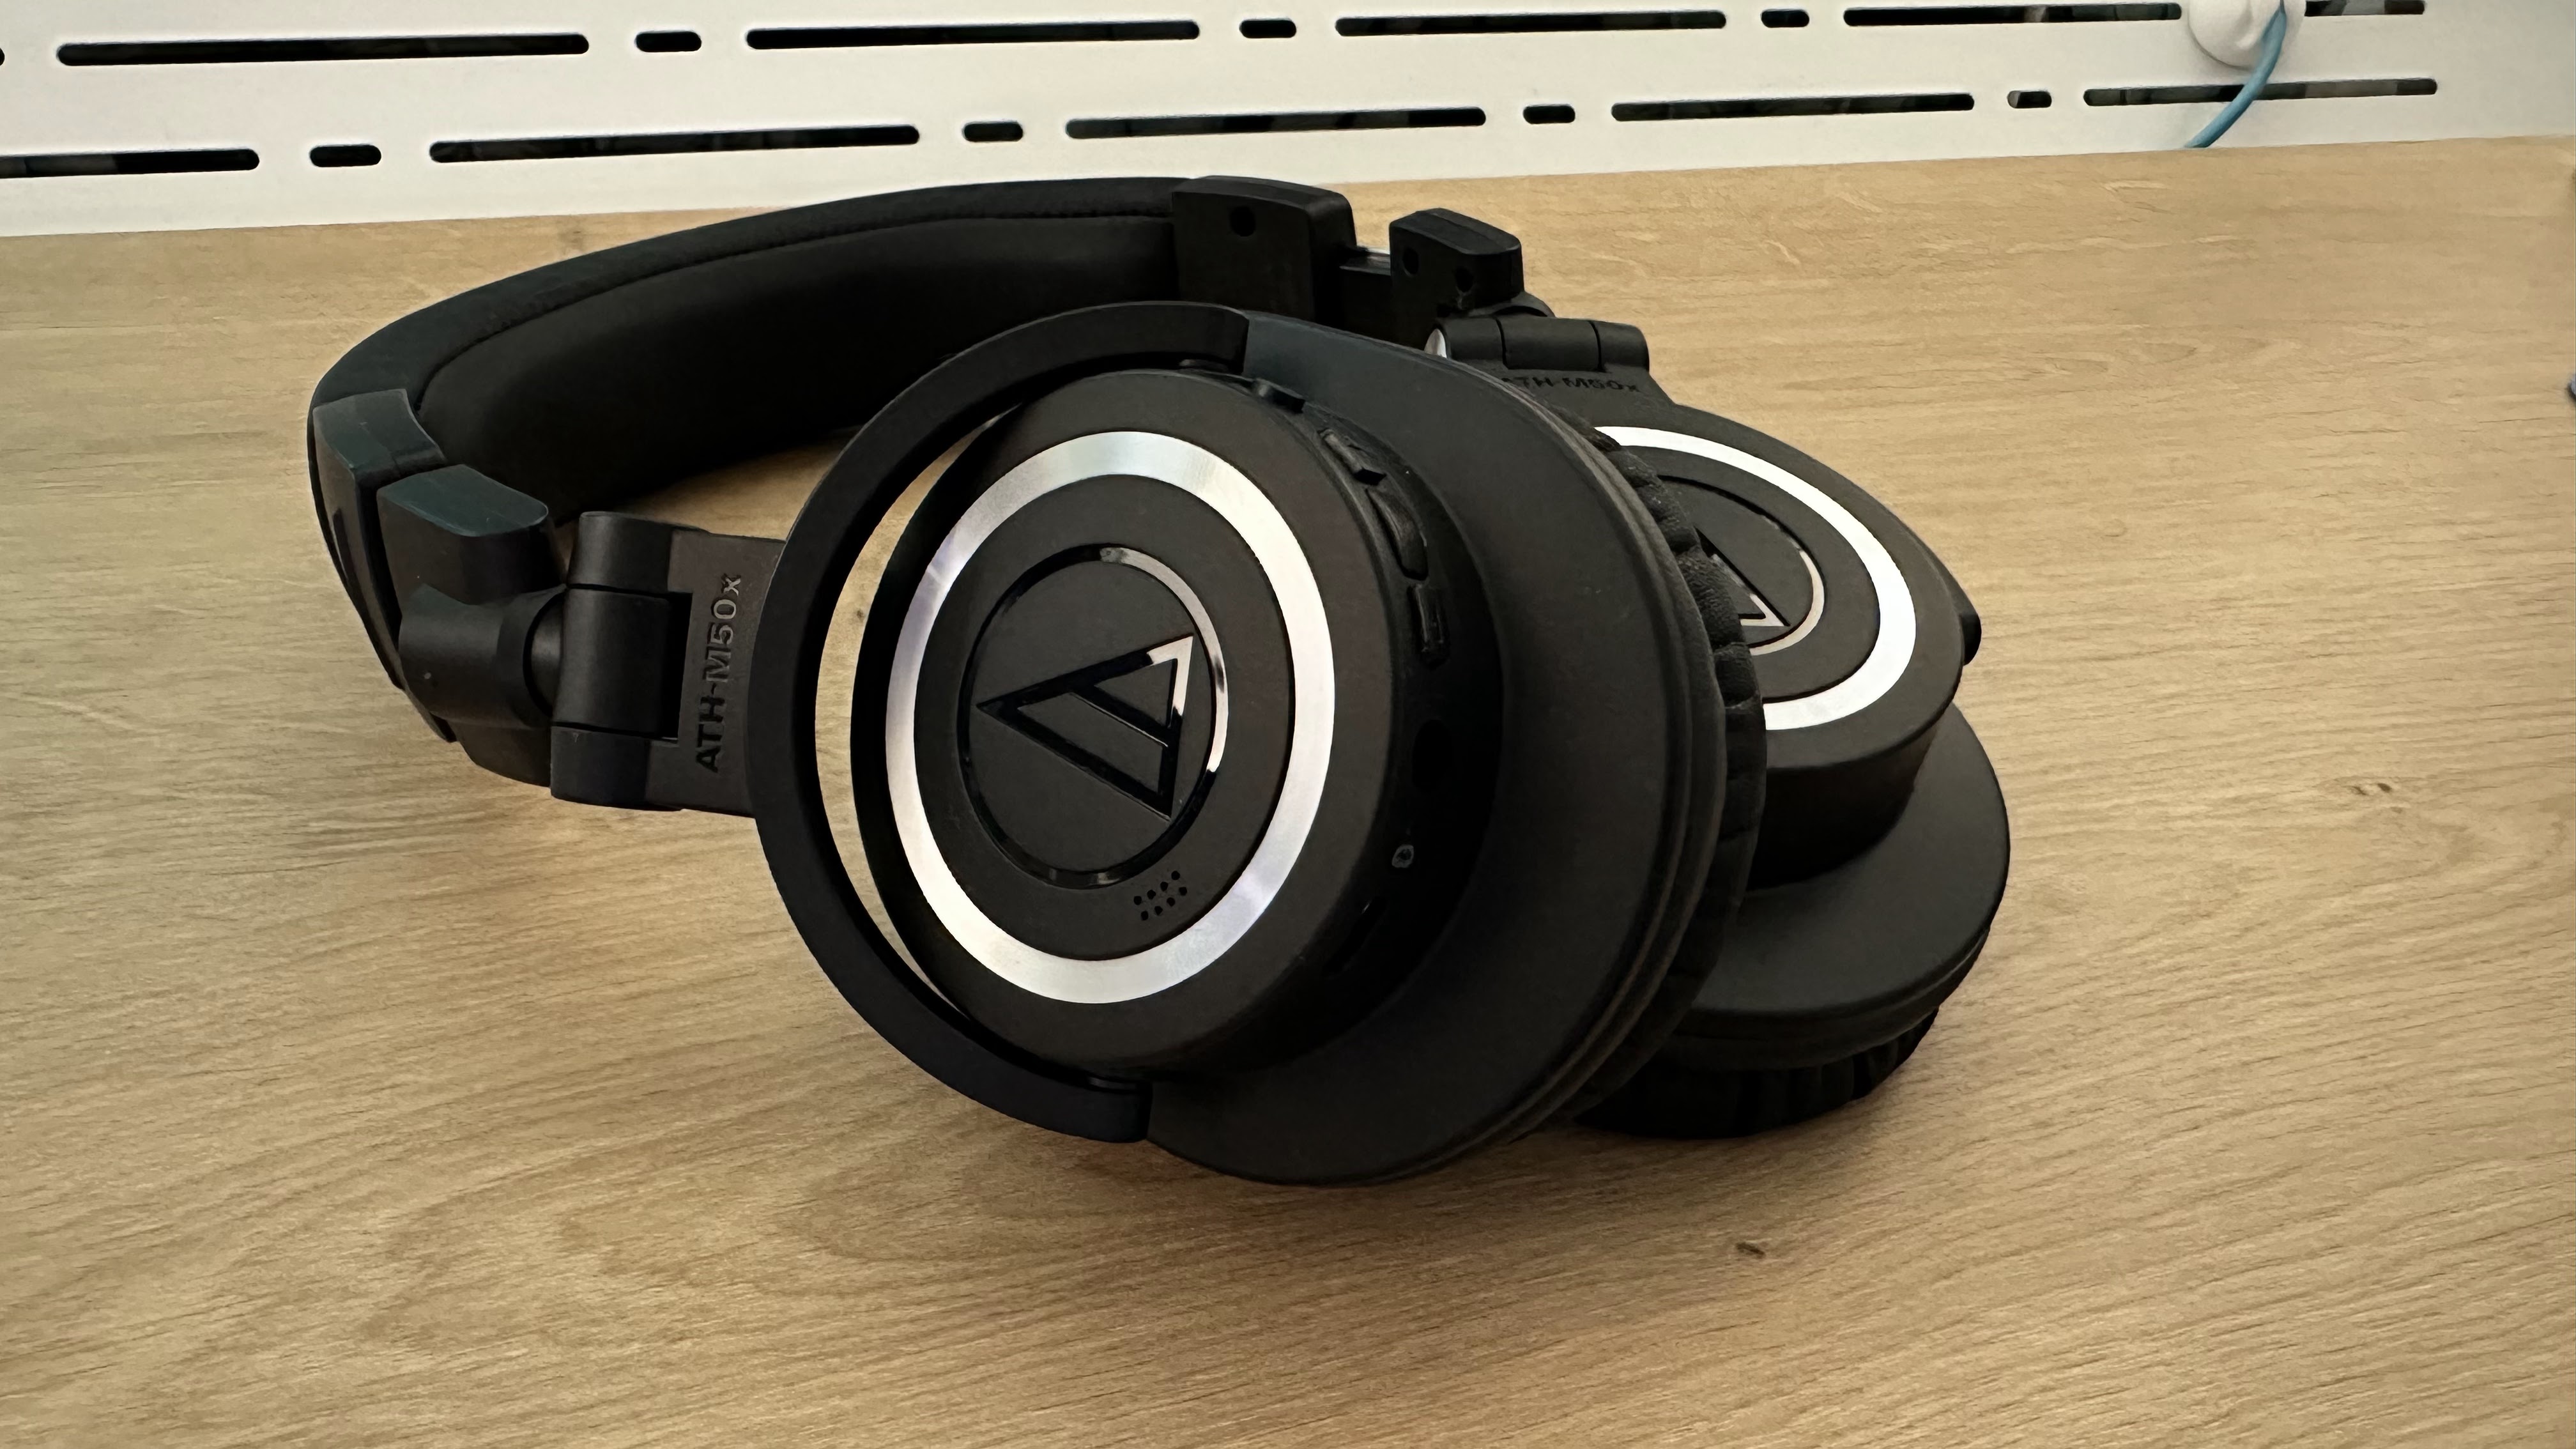 Audio-Technica ATH-M50xBT2 favorable buying at our shop